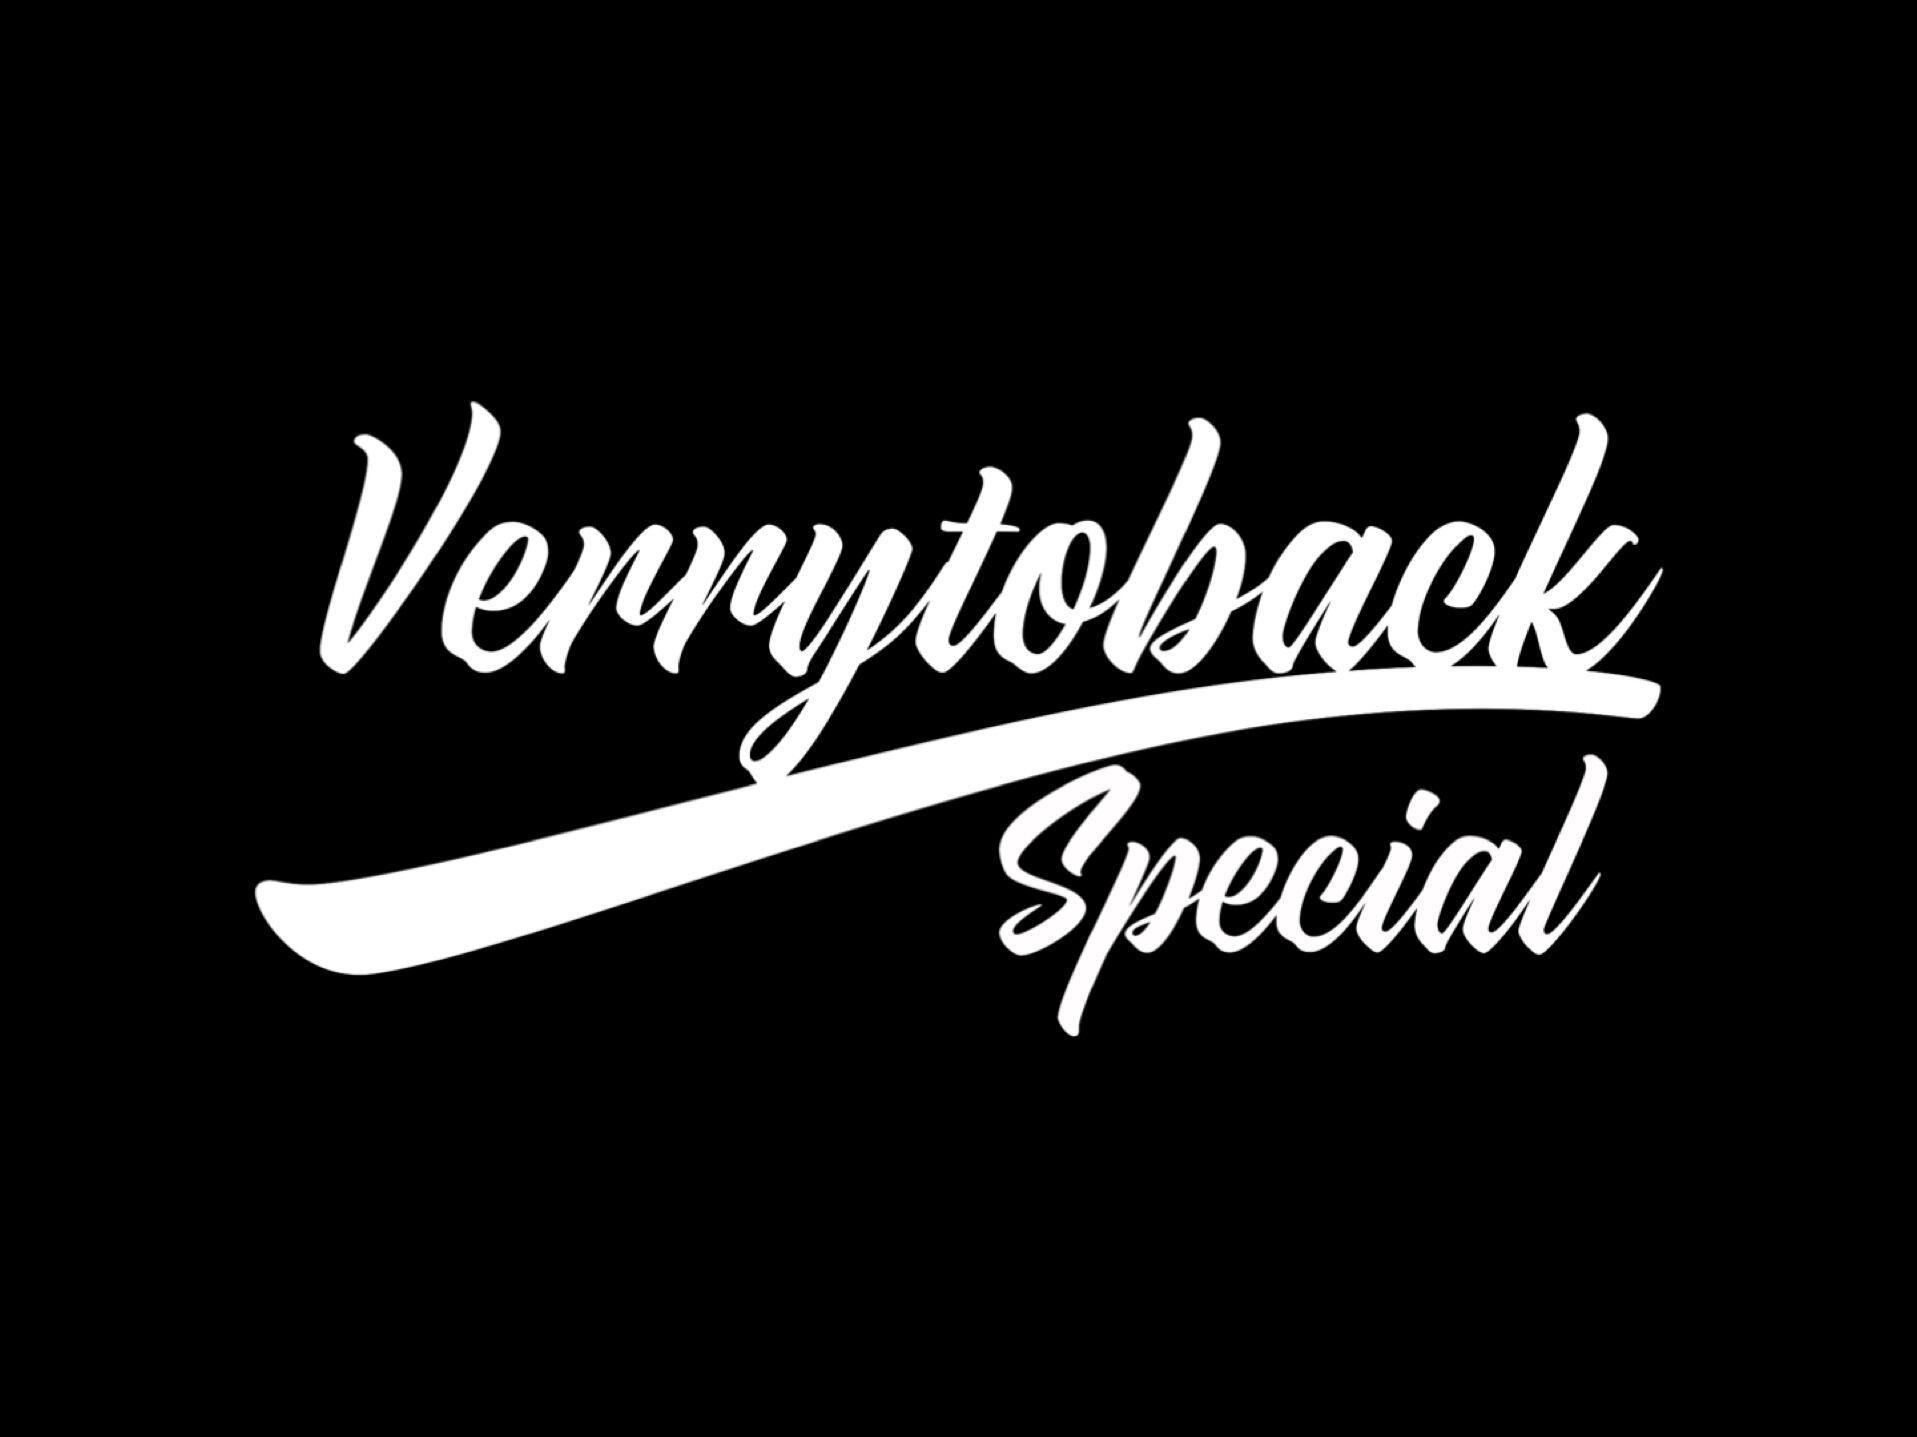 VERRY TO BACK SPECIAL